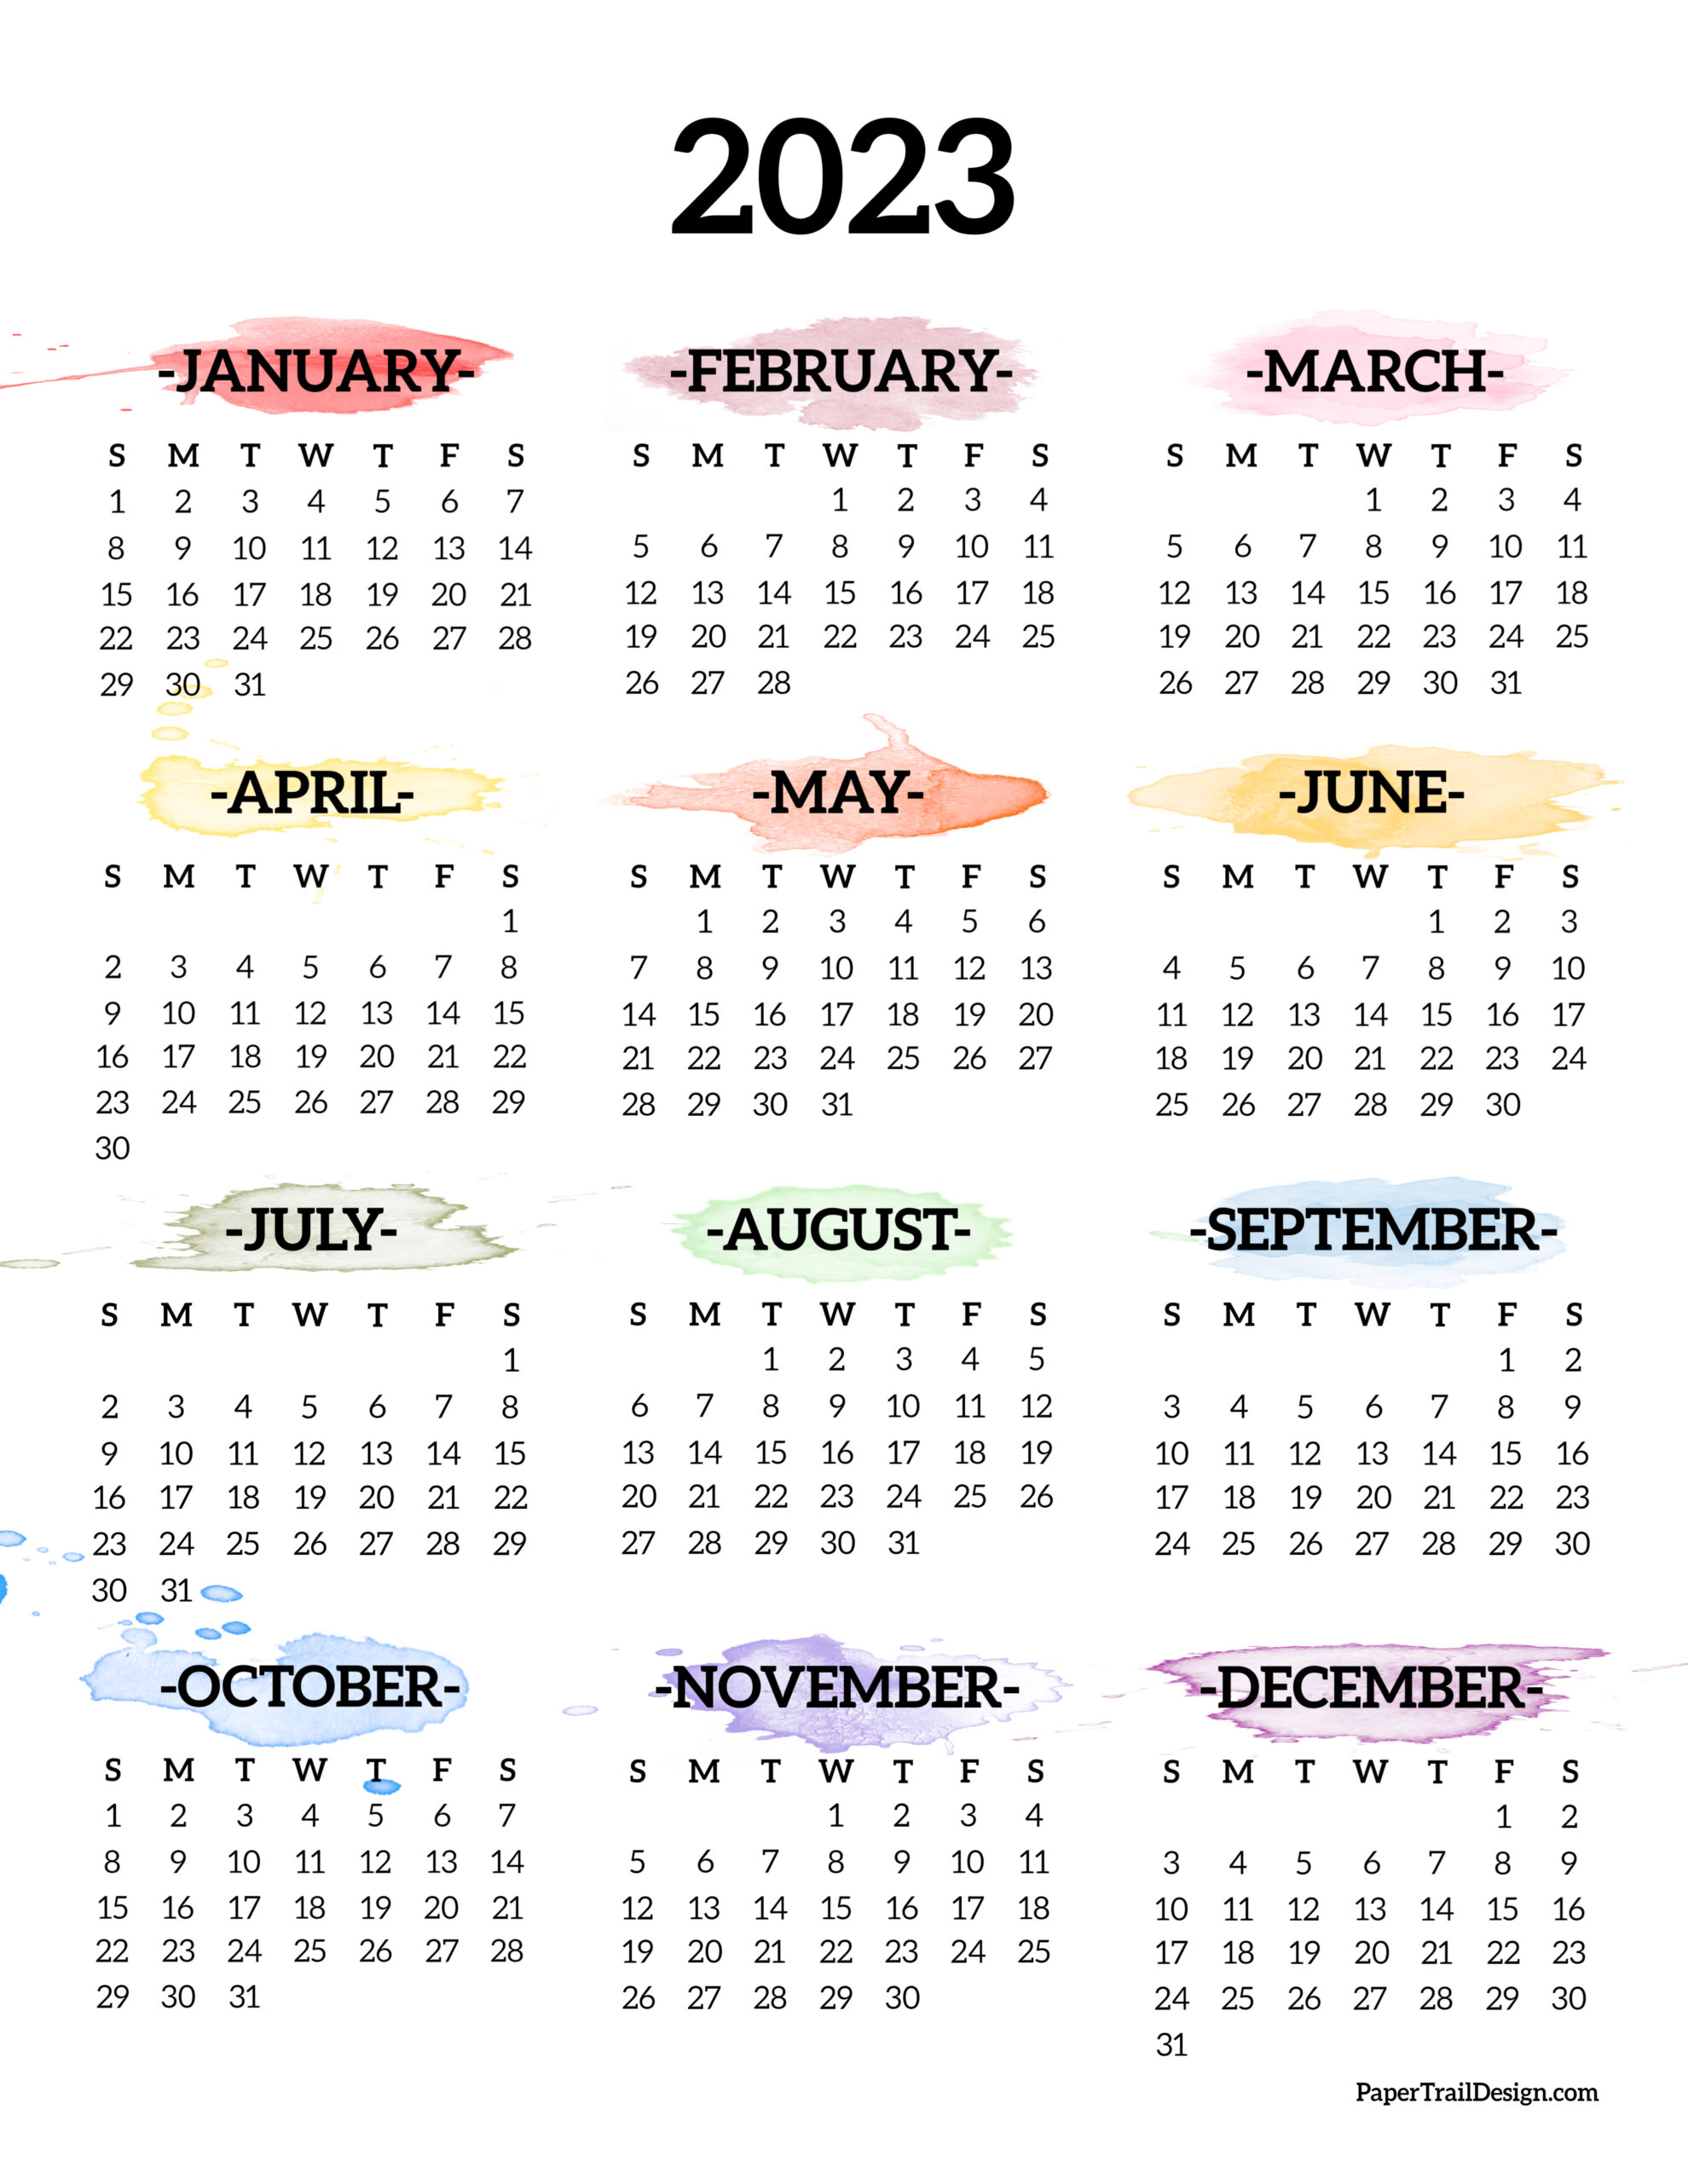 Calendar Printable One Page - Paper